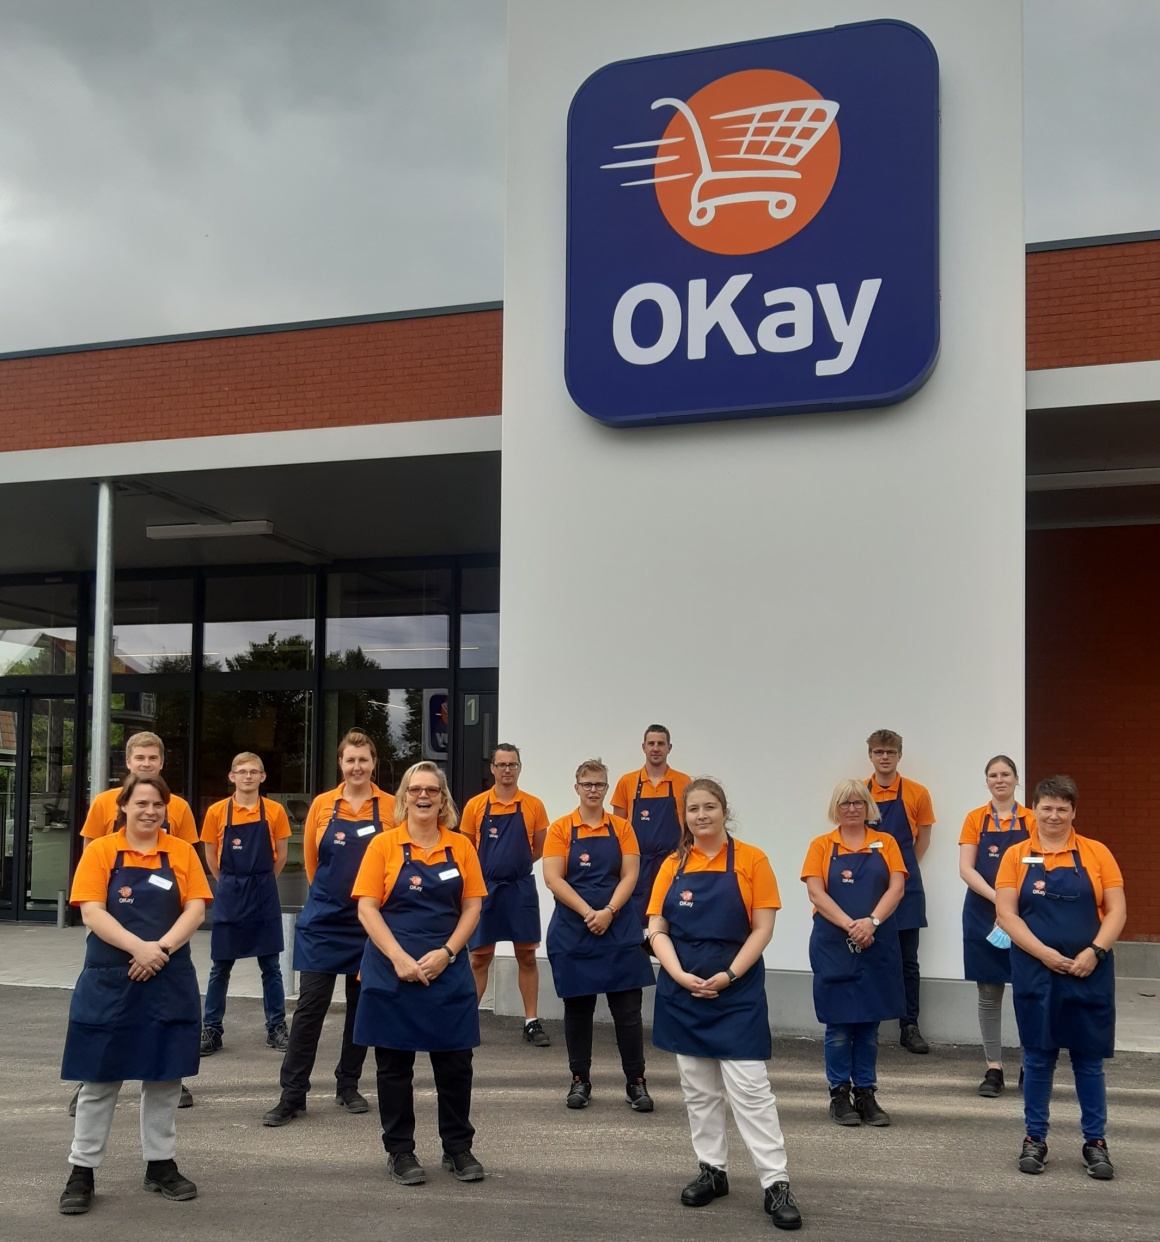 staff wearing orange shirts stand in front of new sustainable local supermarket...